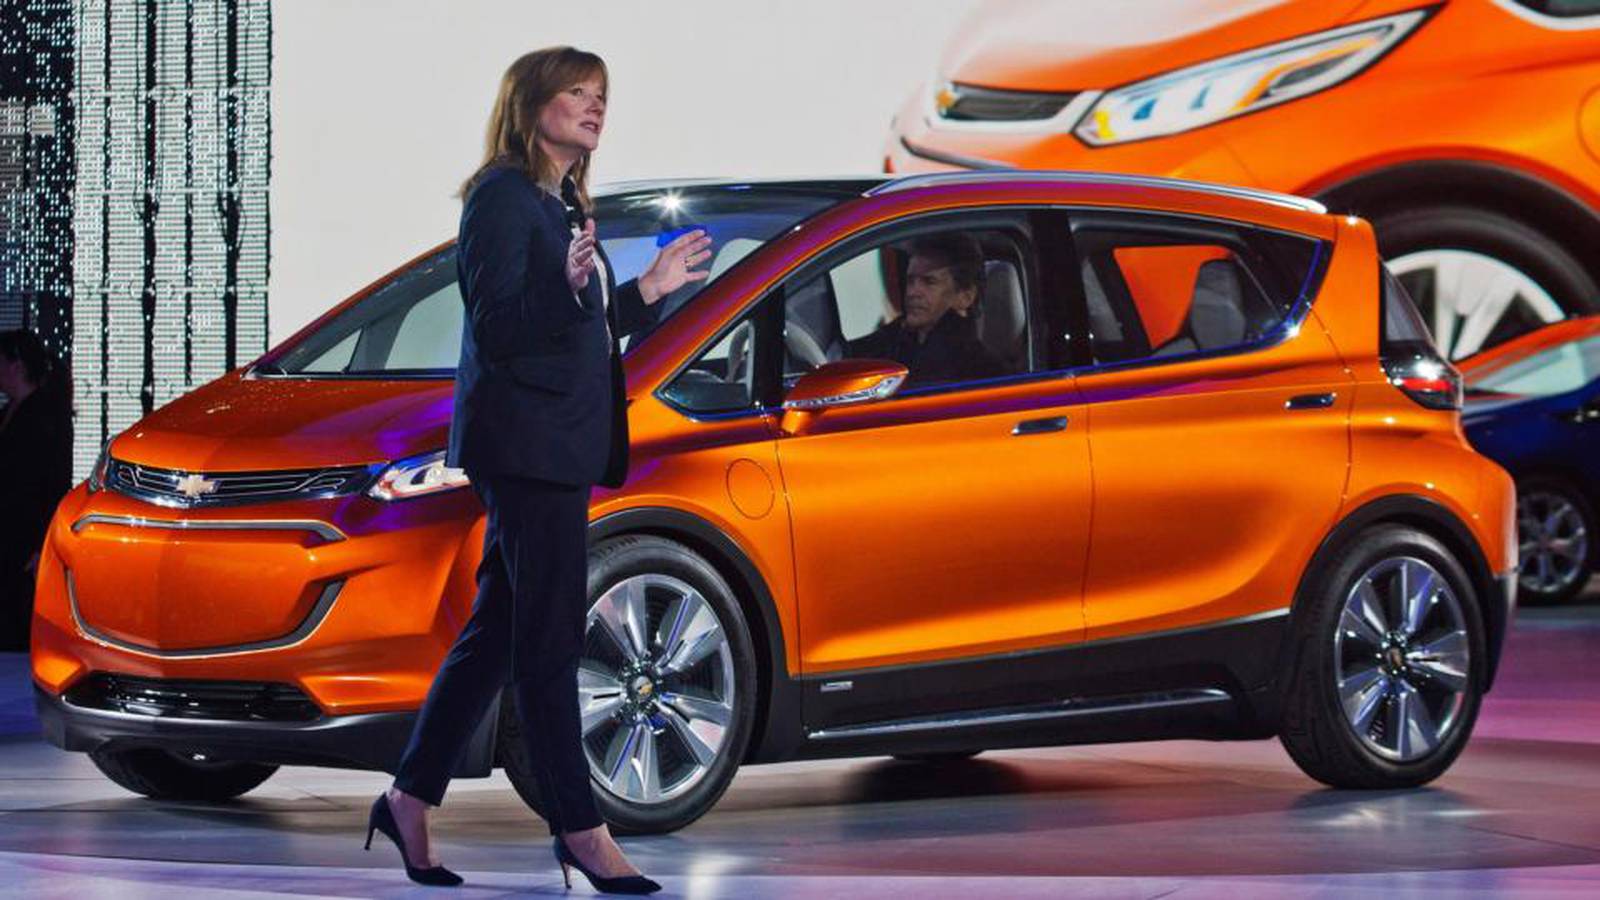 GM shows off its latest electric car Detroit auto show The Irish Times